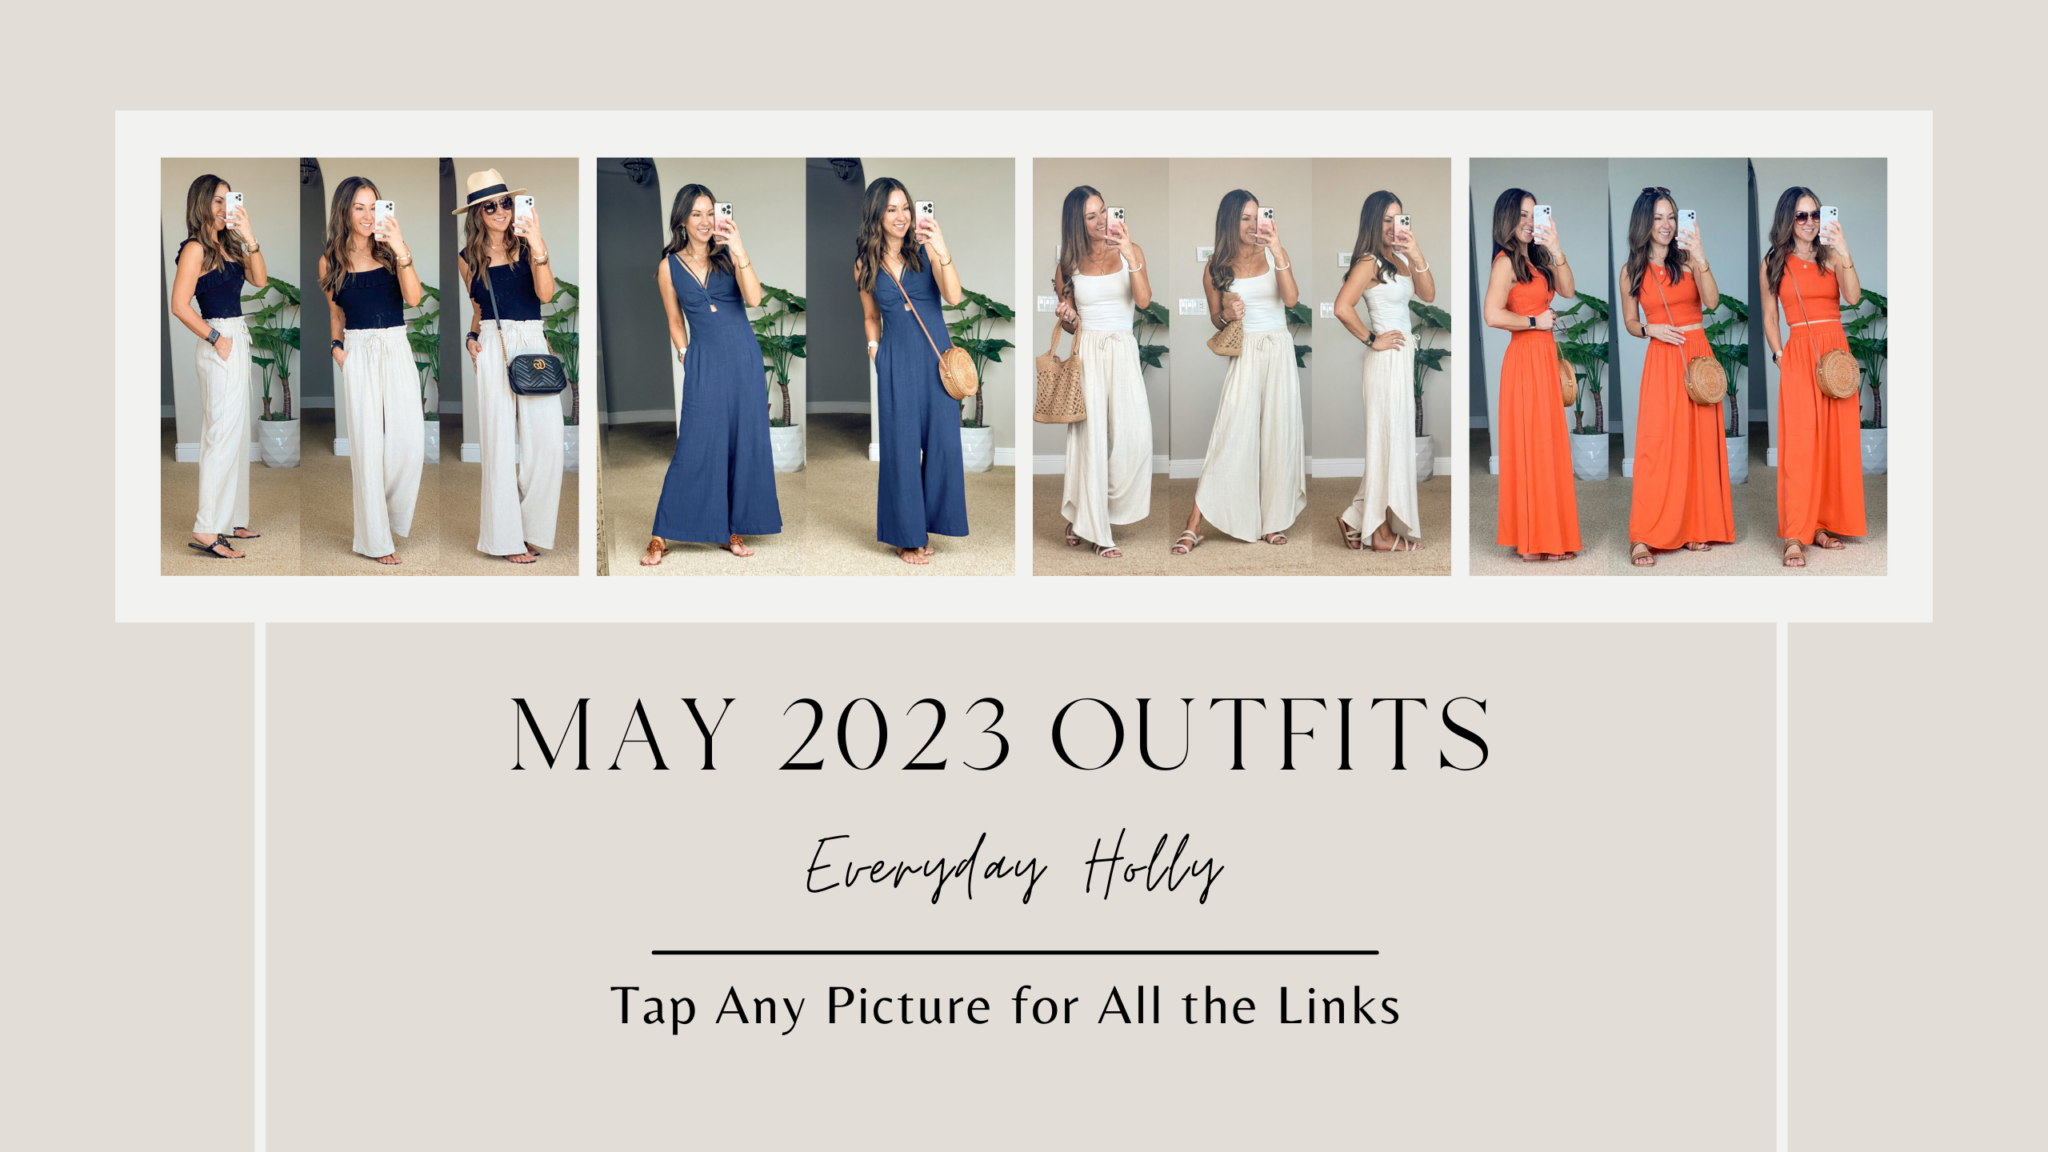 May 2023 Outfit Tryons - Spring, summer, resortwear, activewear - over 40 petite style - Everyday Holly